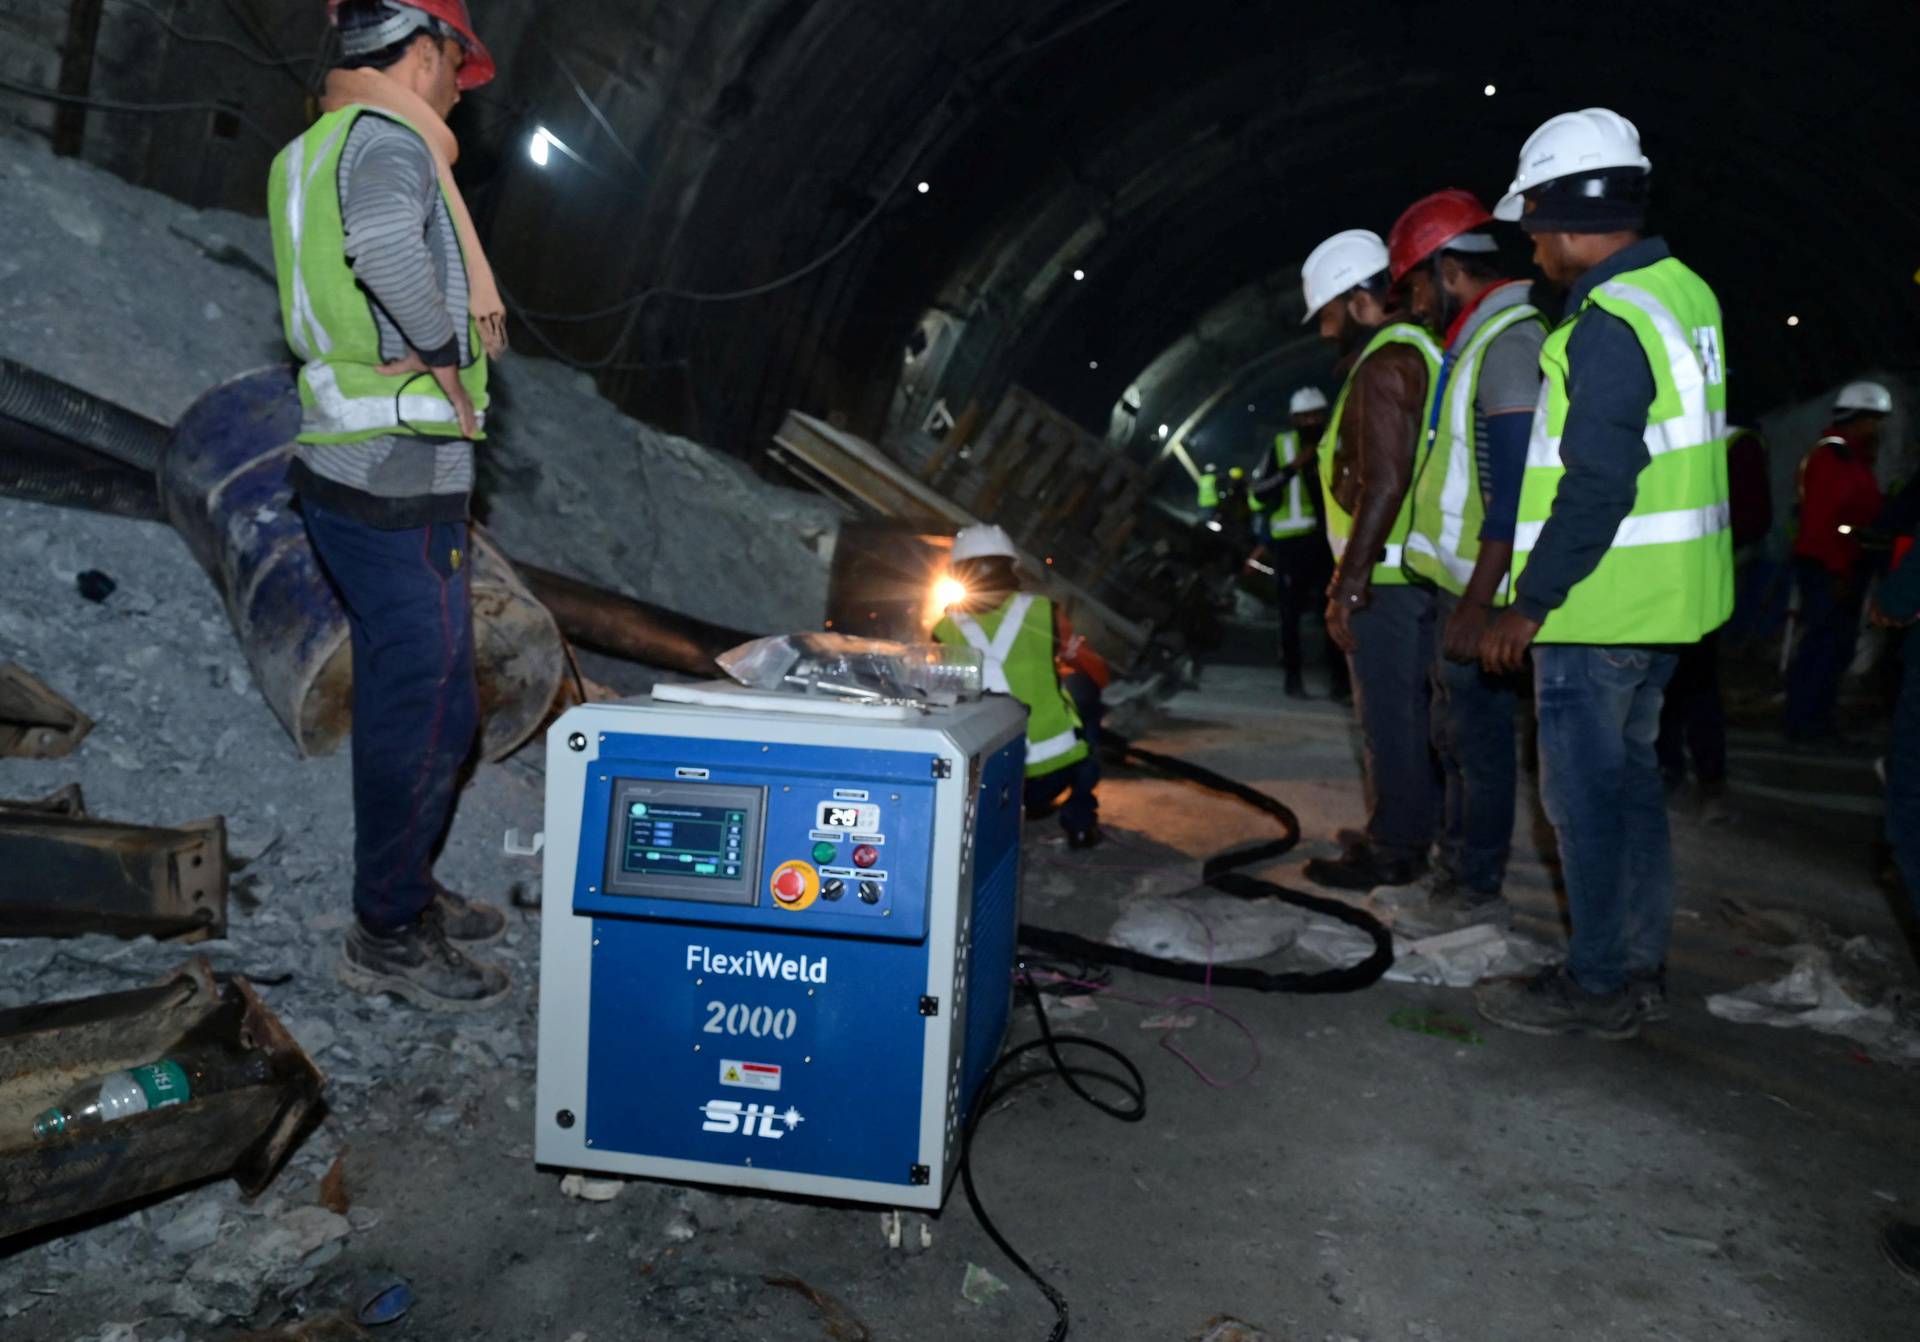 Rescuers fix parts of an auger machine inside a tunnel where workers are trapped after a portion of the tunnel collapsed in Uttarkashi